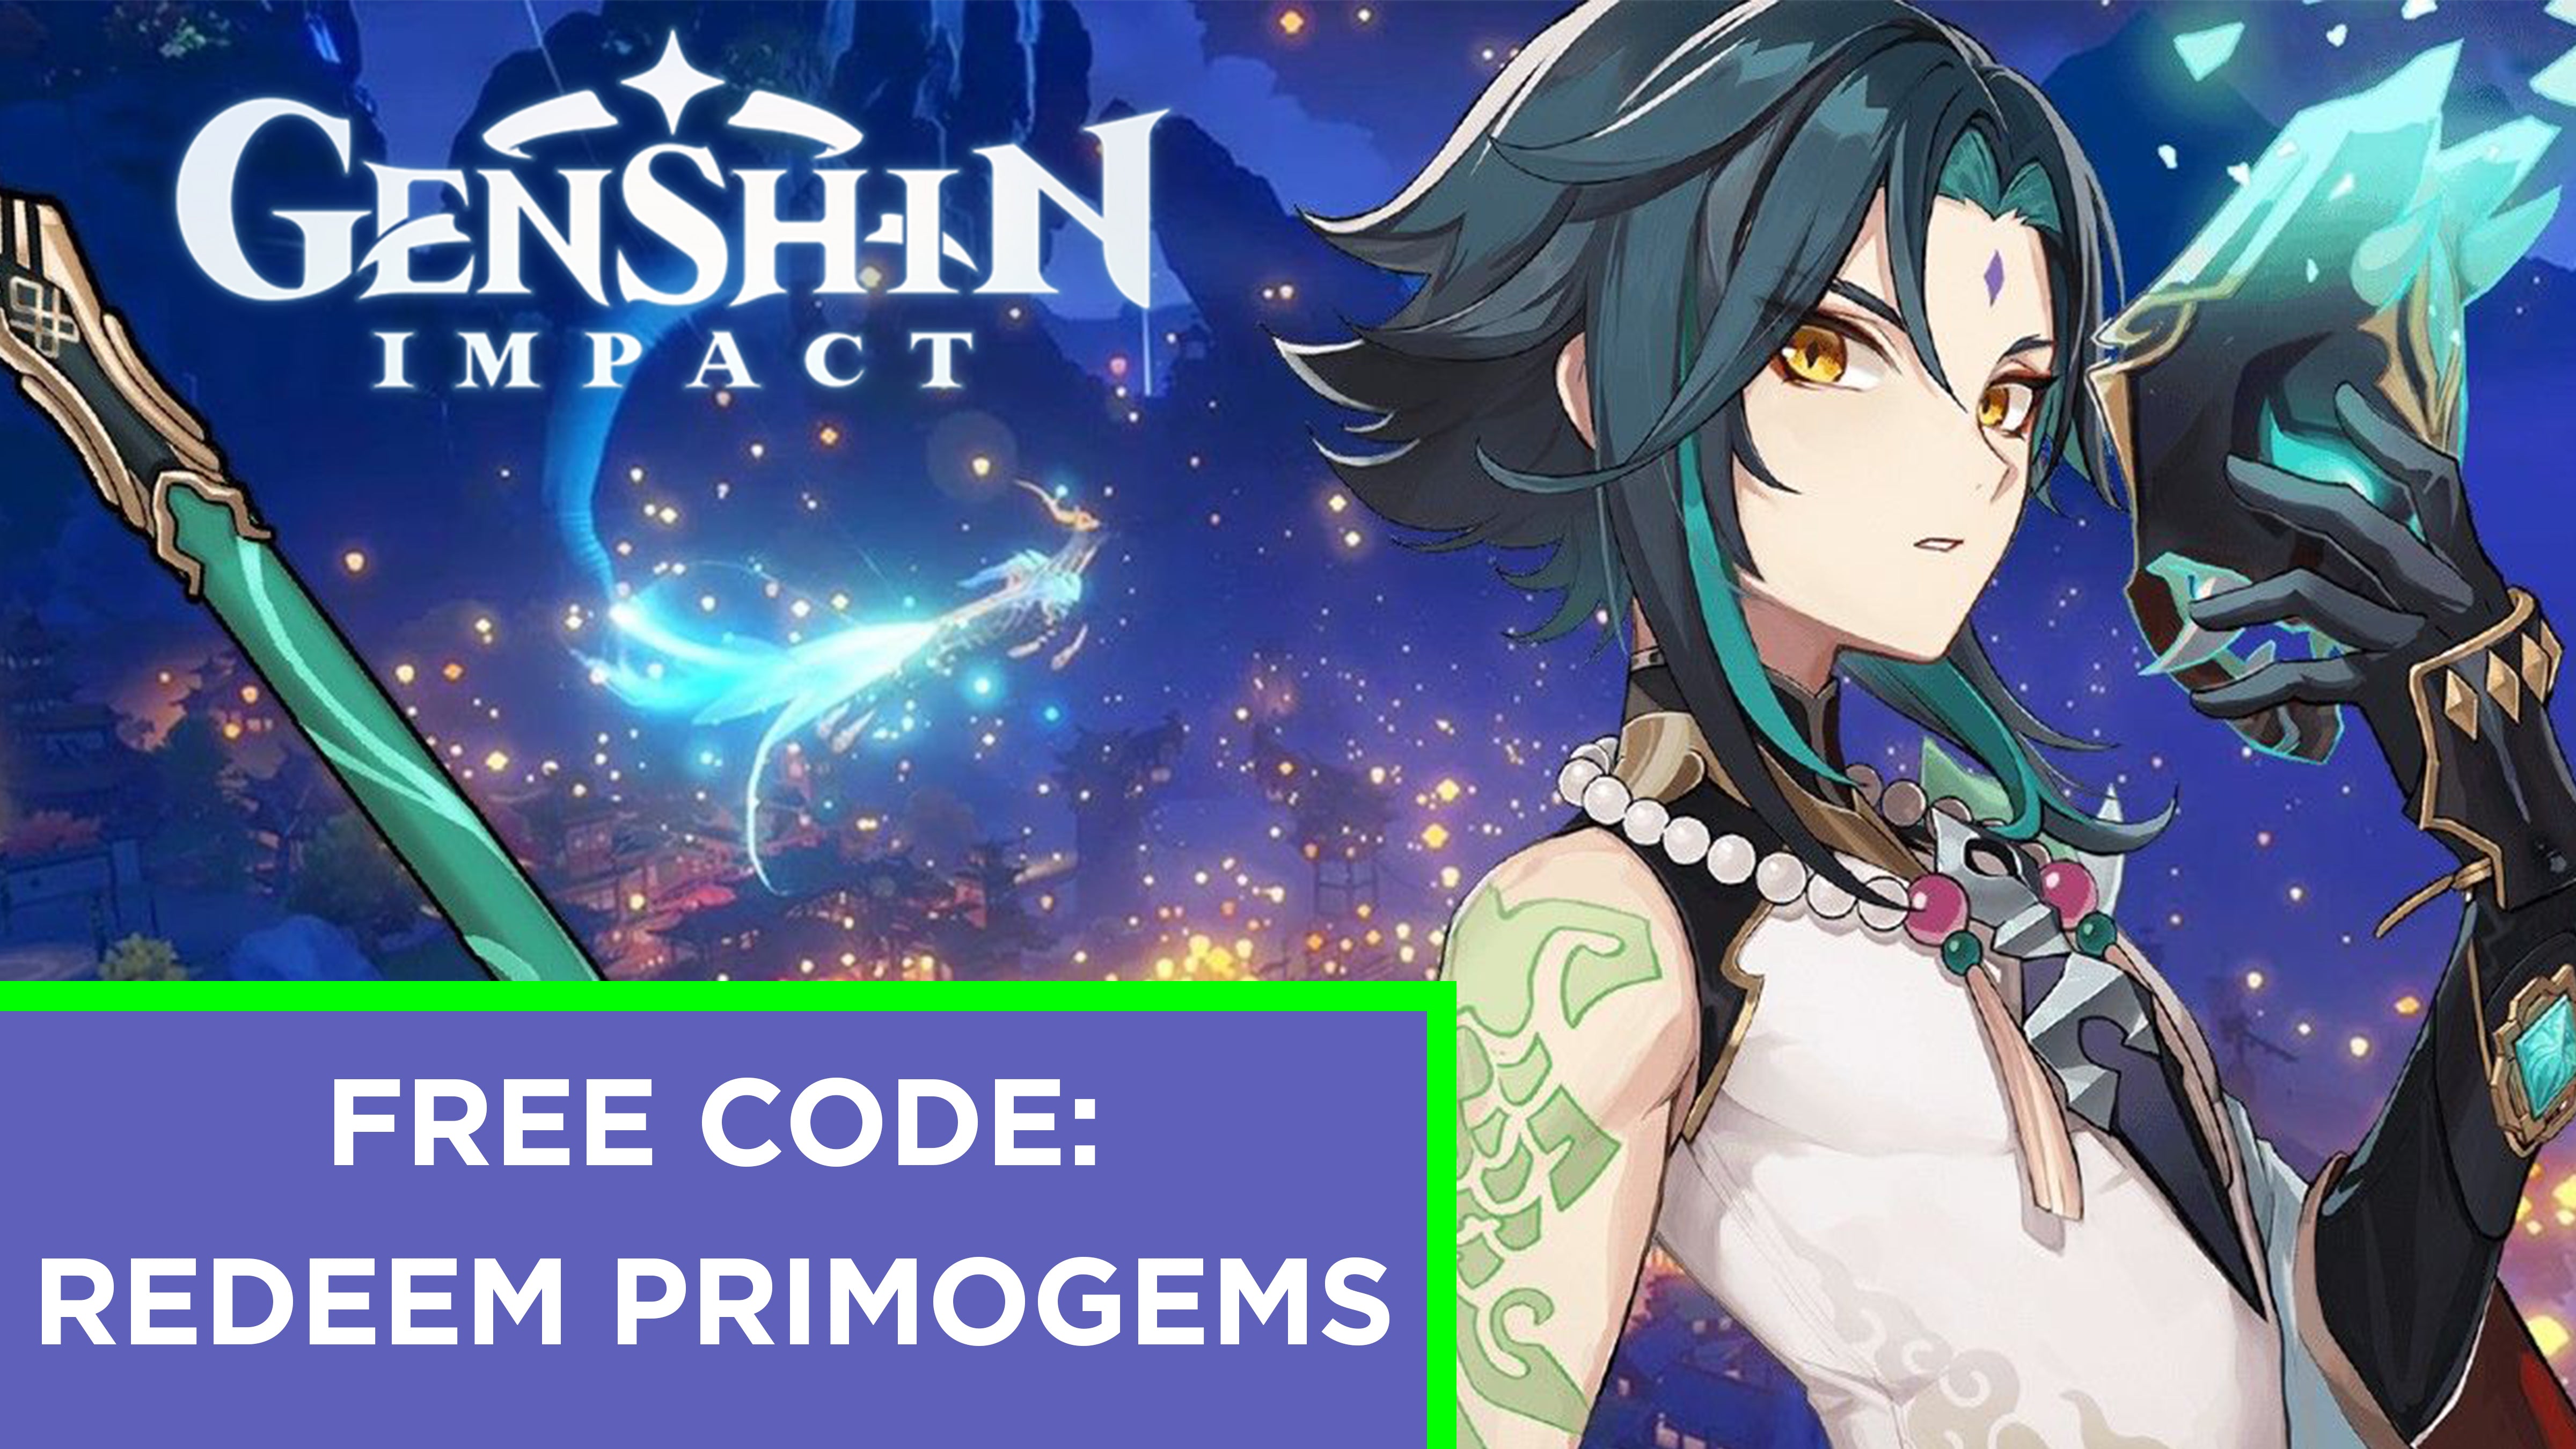 Genshin Impact shares patch 3.6 trailer and celebrates with new free  Primogems codes - Meristation